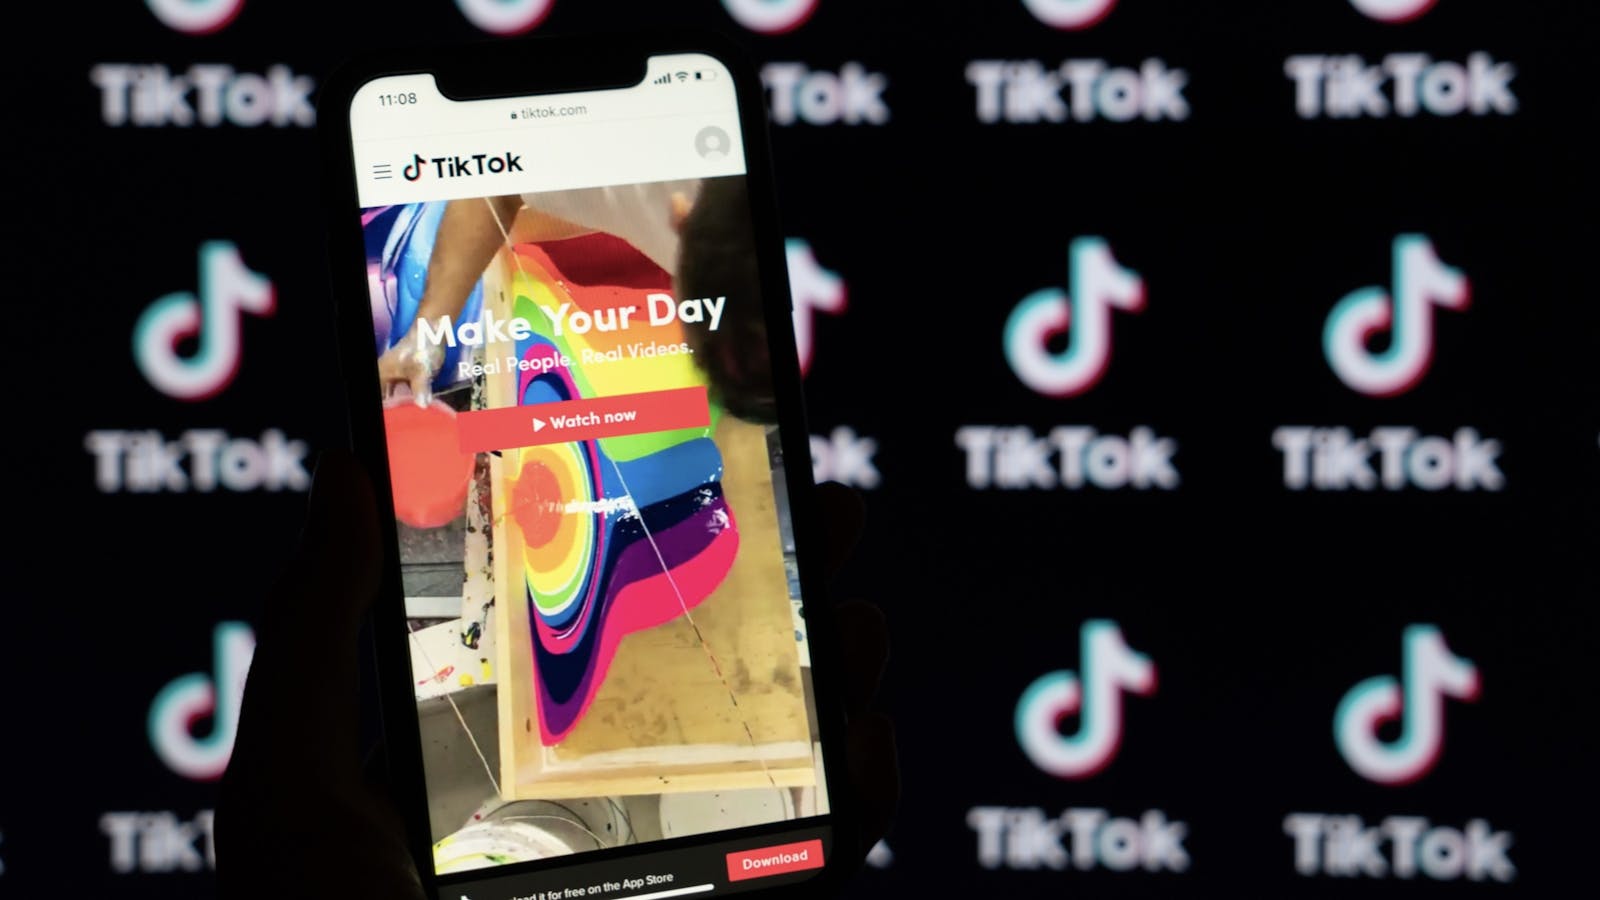 TikTok's app on a smartphone. Photo by Bloomberg.